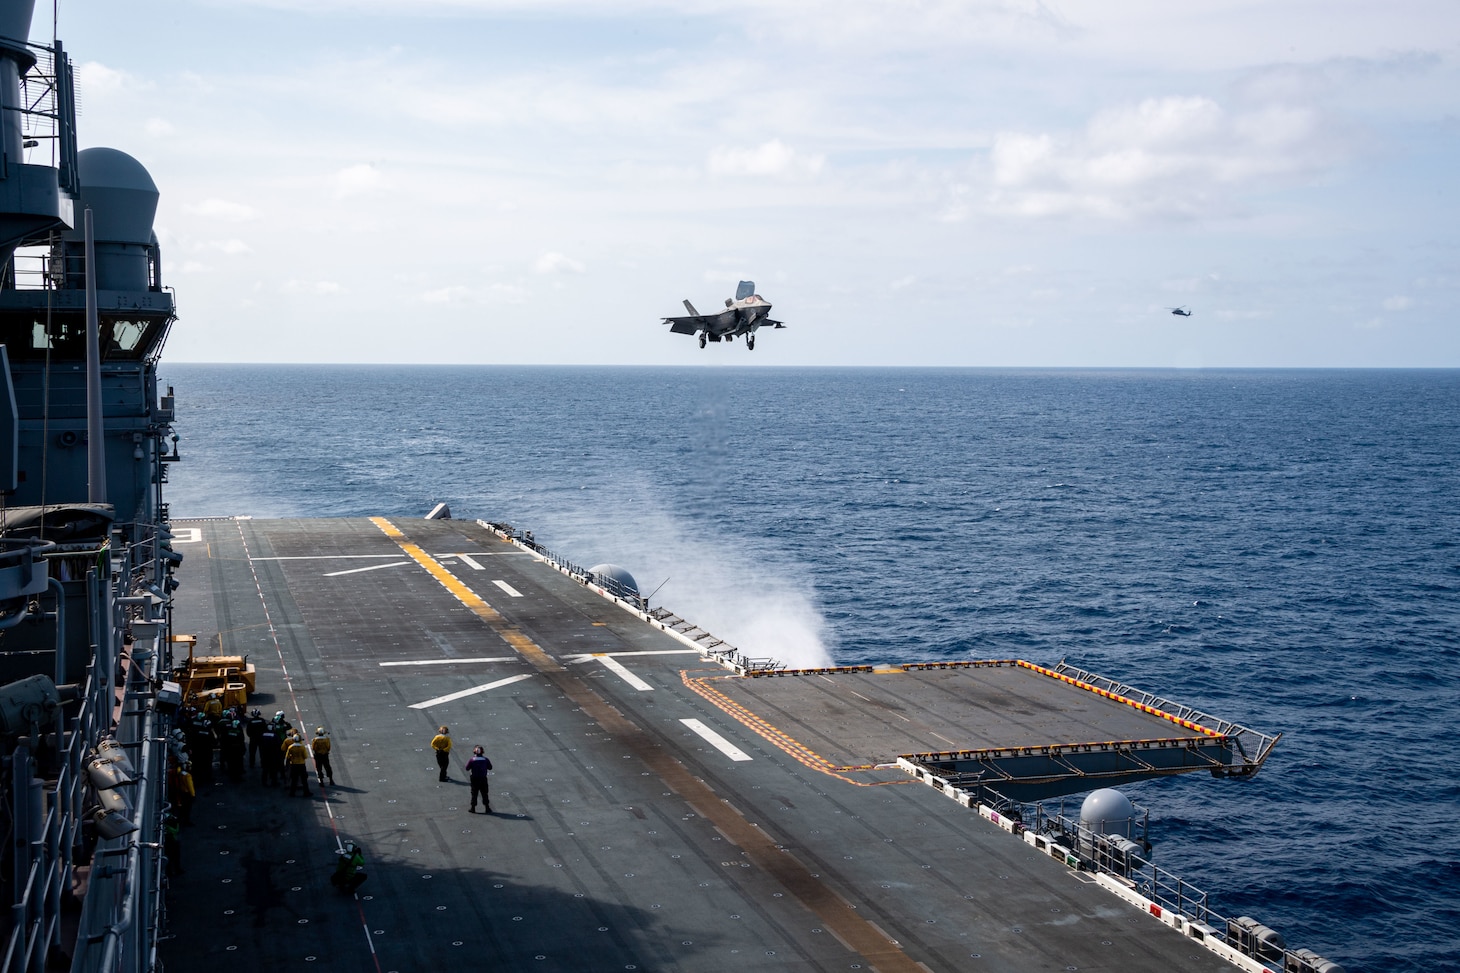 An F-35B Lightning II, assigned to Marine Fighter Attack Squadron (VMFA) 122, 13th Marine Expeditionary Unit, embarked aboard the Makin Island Amphibious Ready Group prepares to land on the flight deck of the forward-deployed amphibious assault ship USS America (LHA 6) during forward arming and refueling ship (FARS) operations while sailing in the East China Sea.